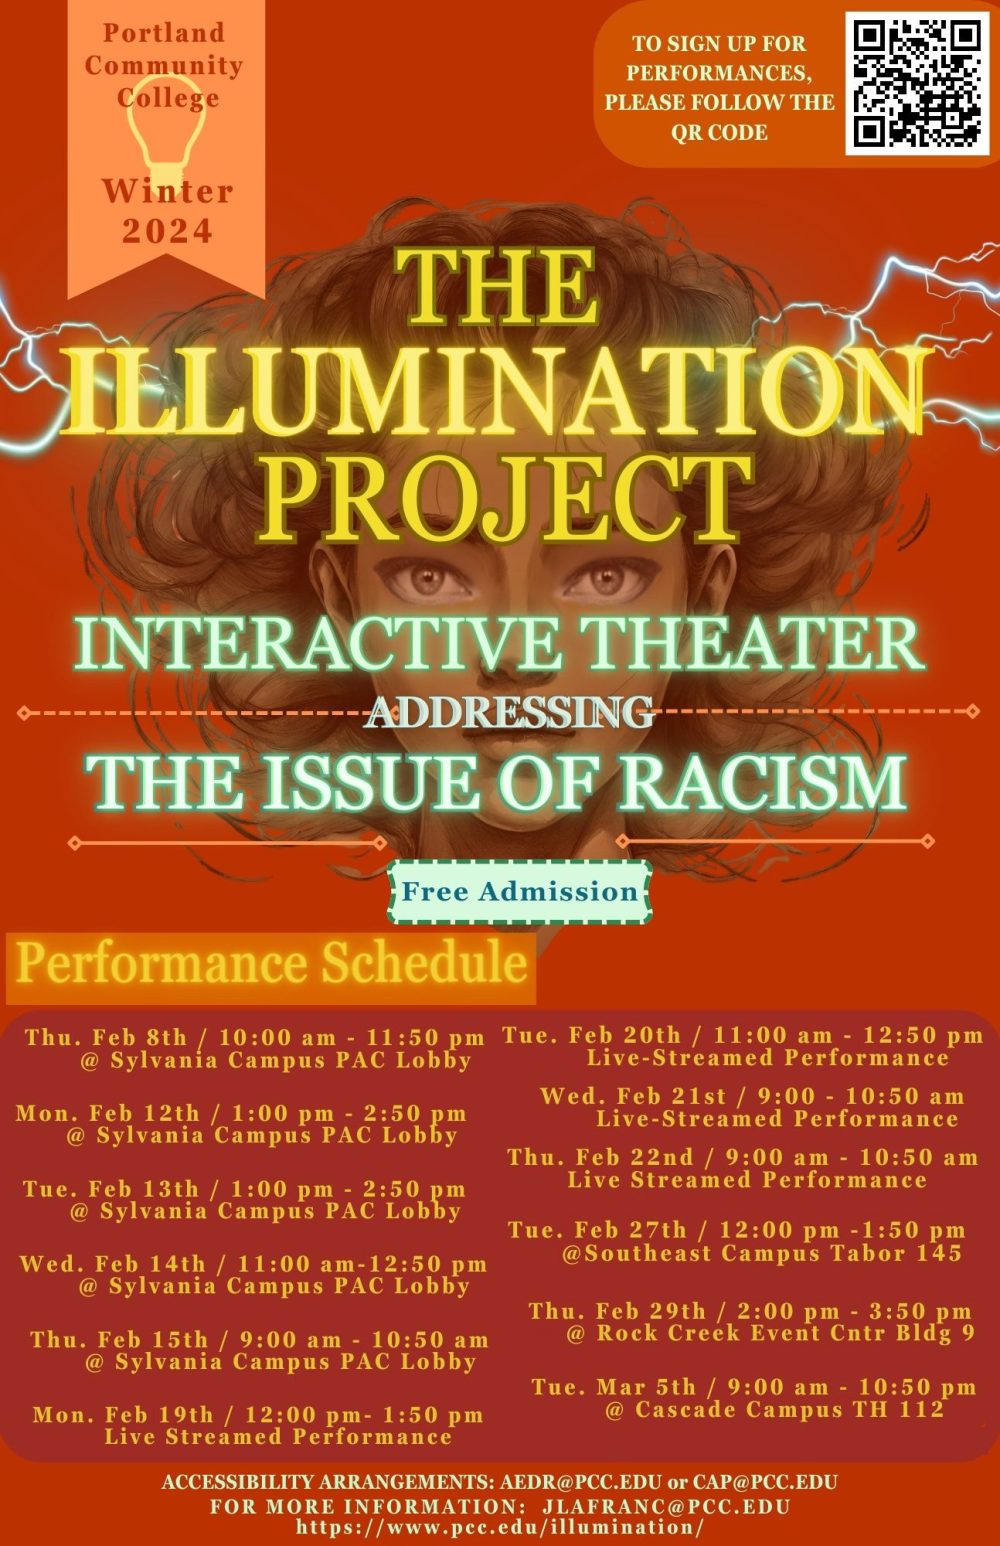 Performance schedule Illumination Project at PCC